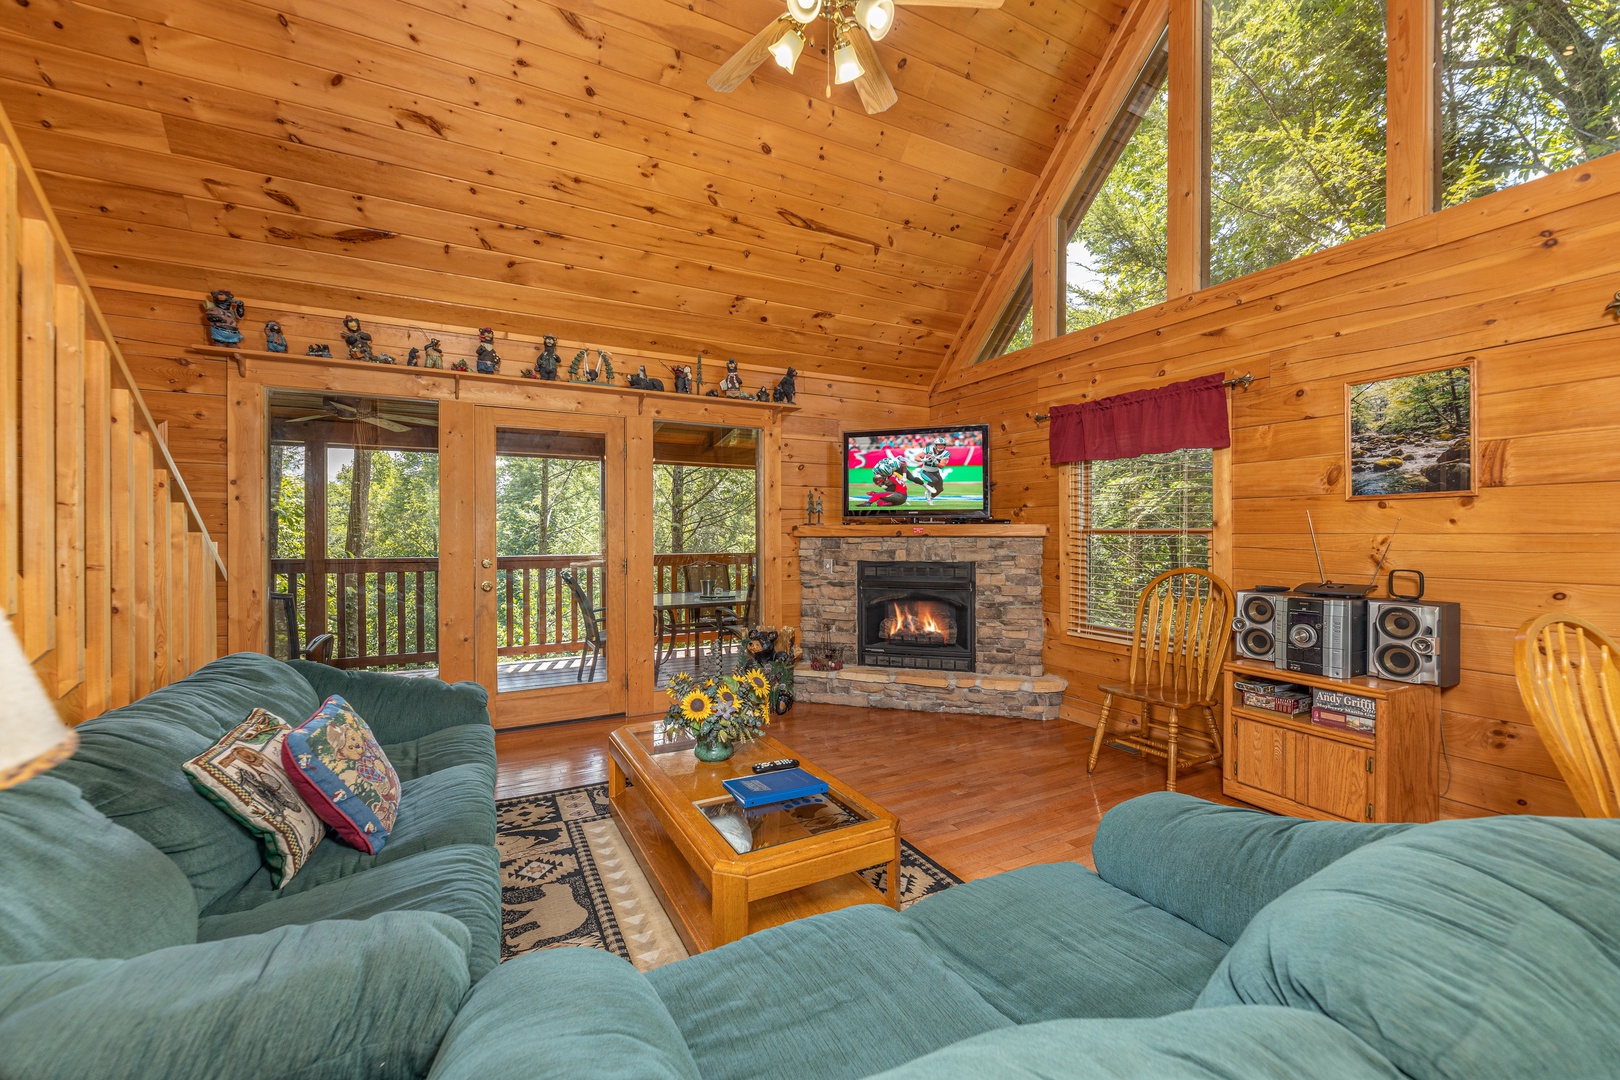 Living room with sofa, loveseat, fireplace, and TV at Cub's Crossing, a 3 bedroom cabin rental located in Gatlinburg